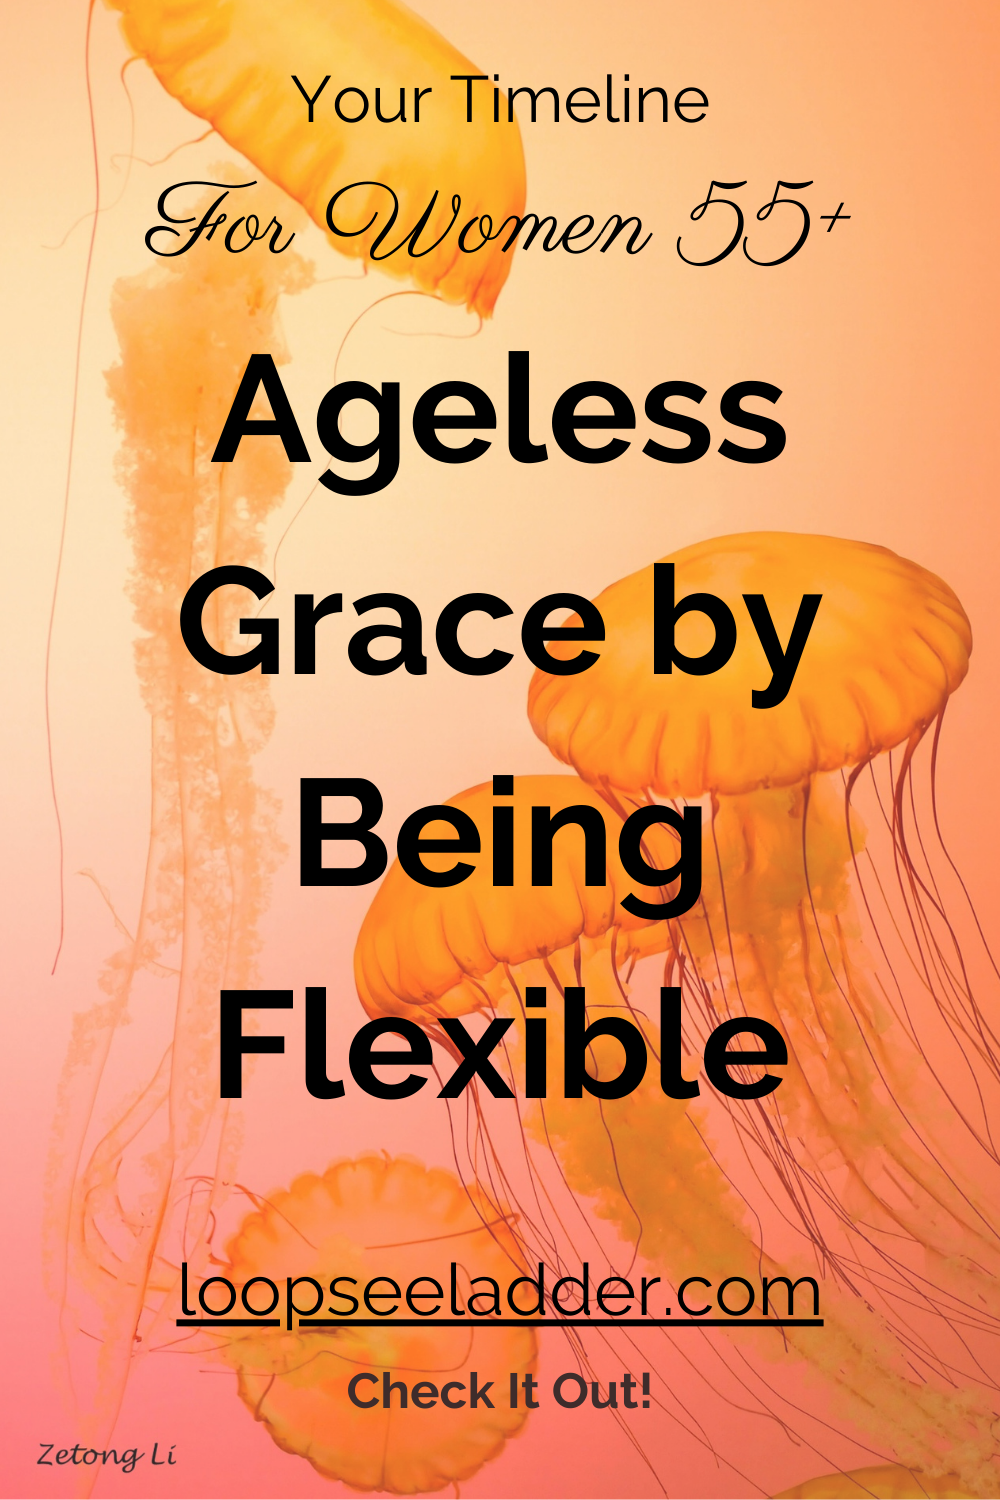 The Surprising Path to Ageless Grace: Embracing Jelly-Like Flexibility in Your 55+ Journey